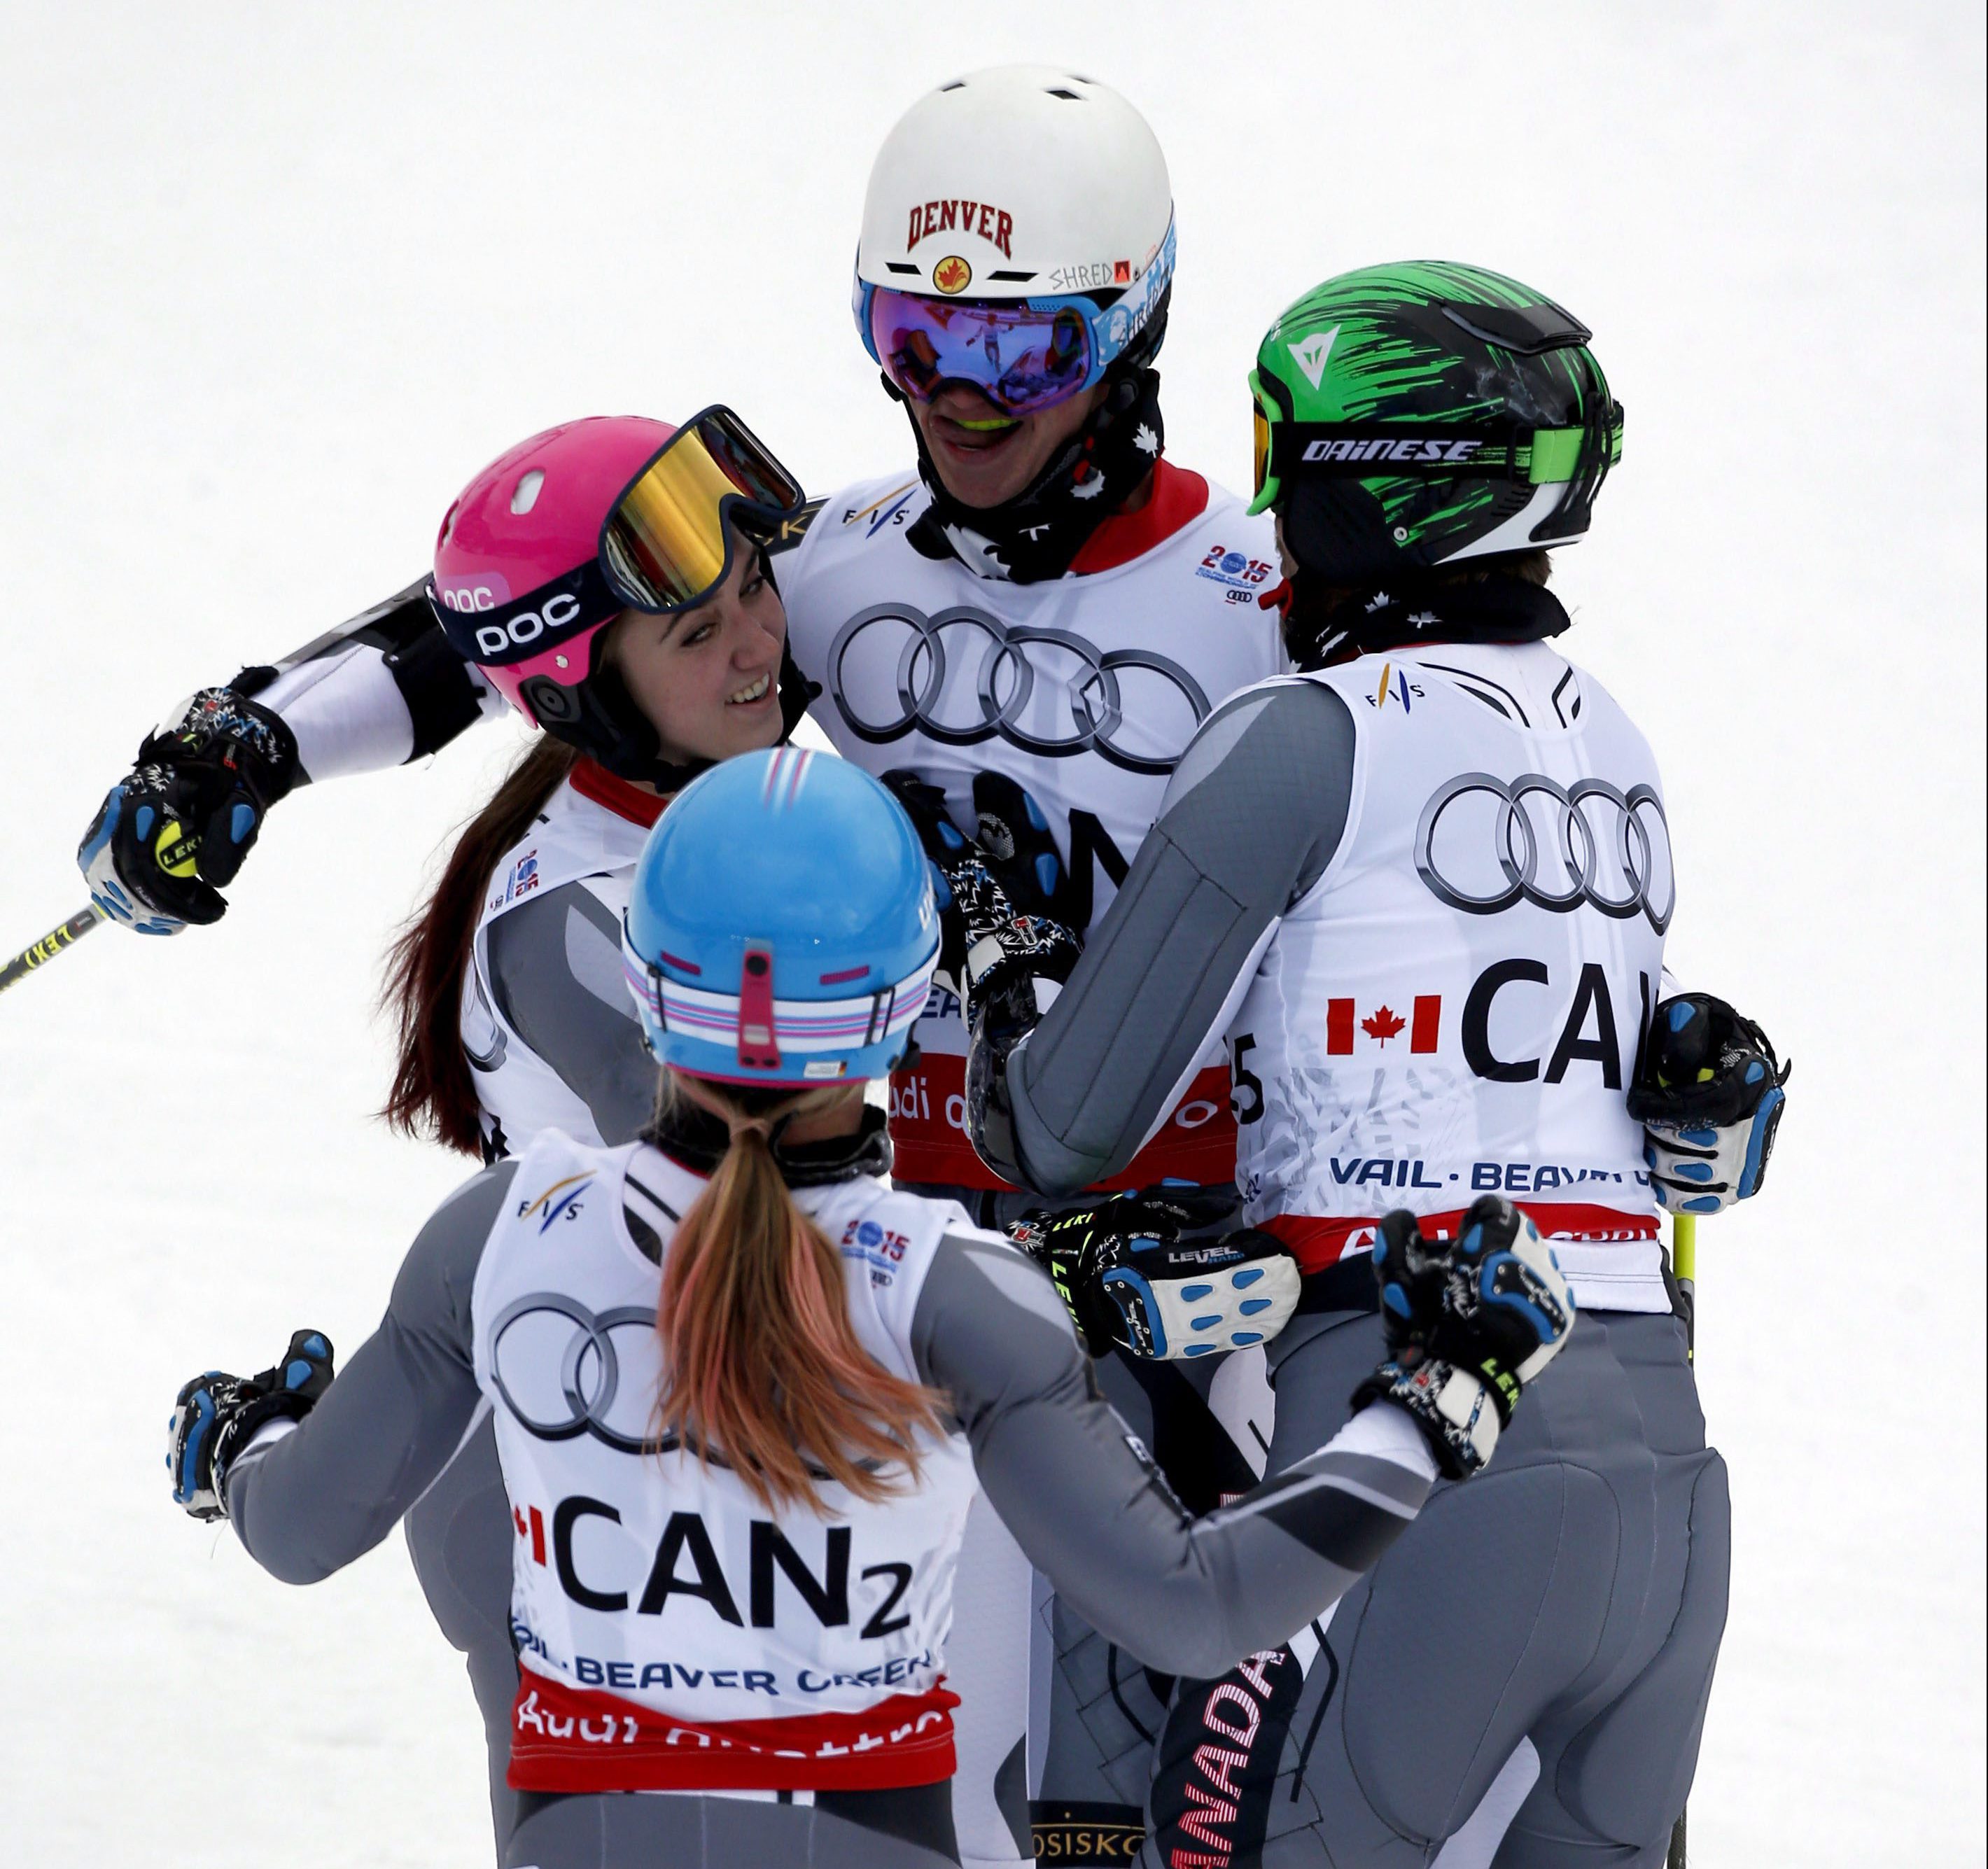 Canada's Trevor Philp, top, Candace Crawford, left, Erin Mielzynski, bottom, and Phil Brown during the mixed worlds team skiing event at the alpine skiing world championships, Tuesday, Feb. 10, 2015, in Vail, Colo. (AP Photo/John Locher)